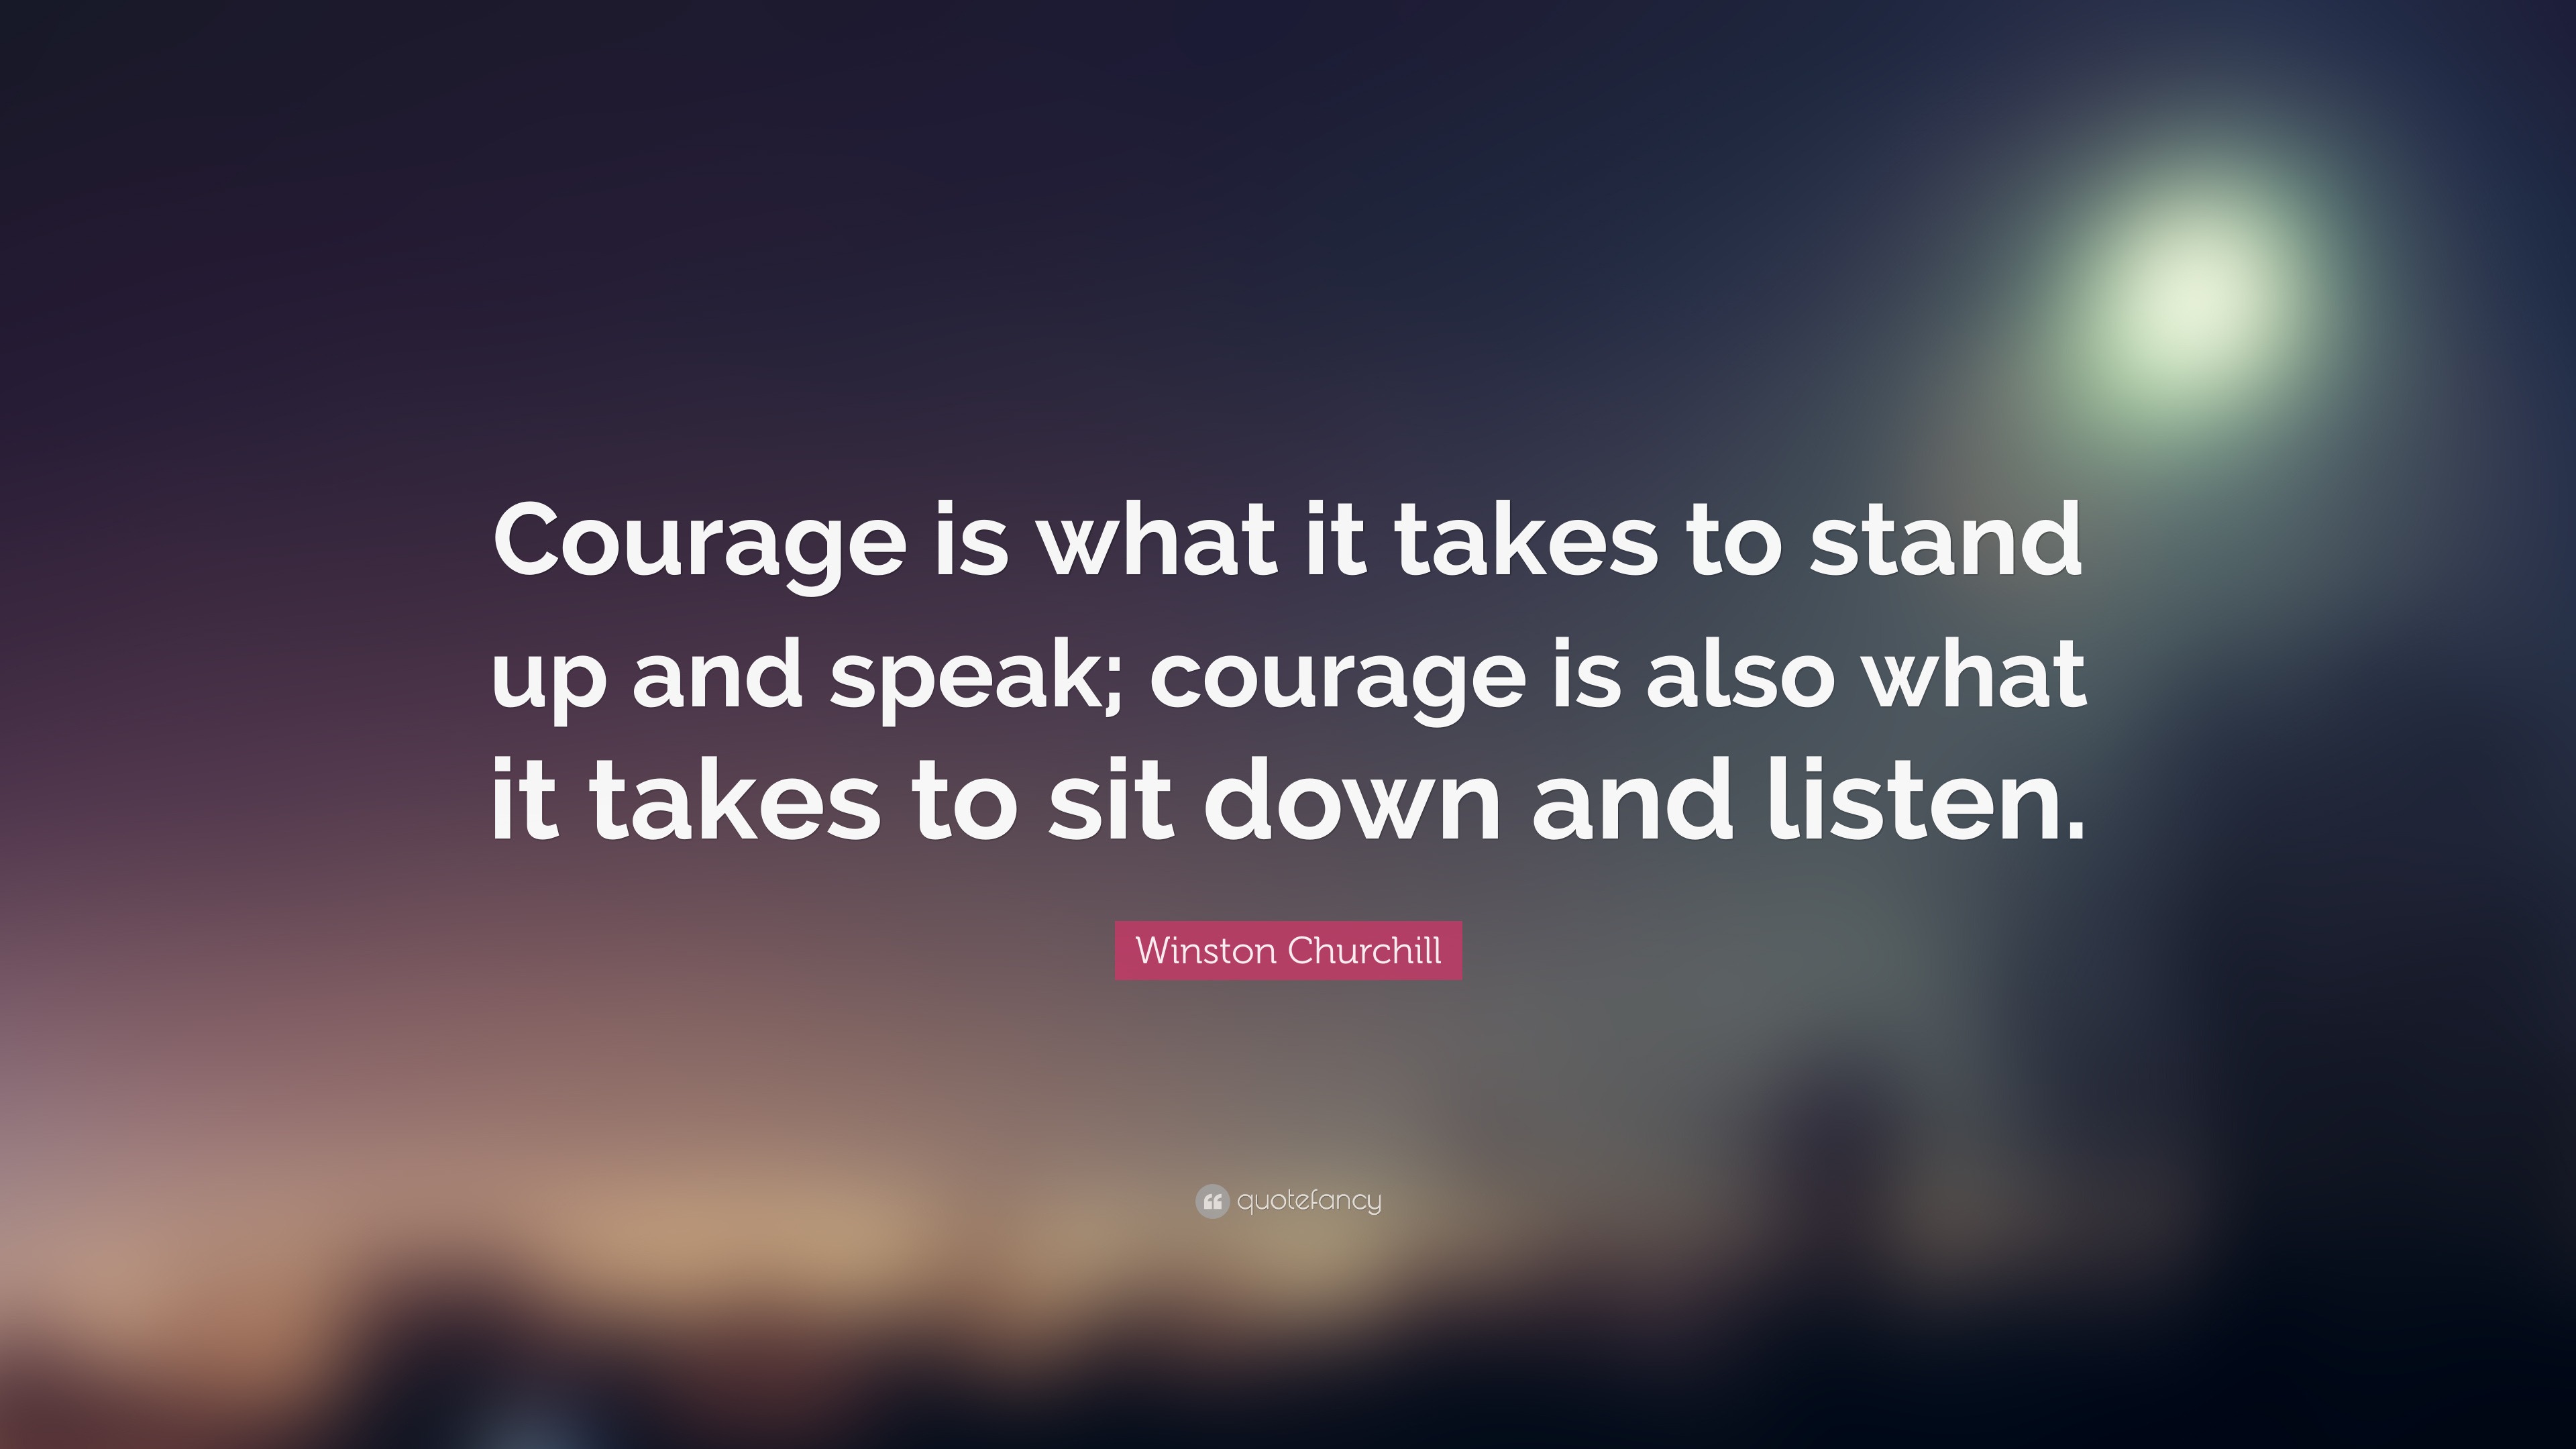 Winston Churchill Quote: “Courage is what it takes to stand up and ...